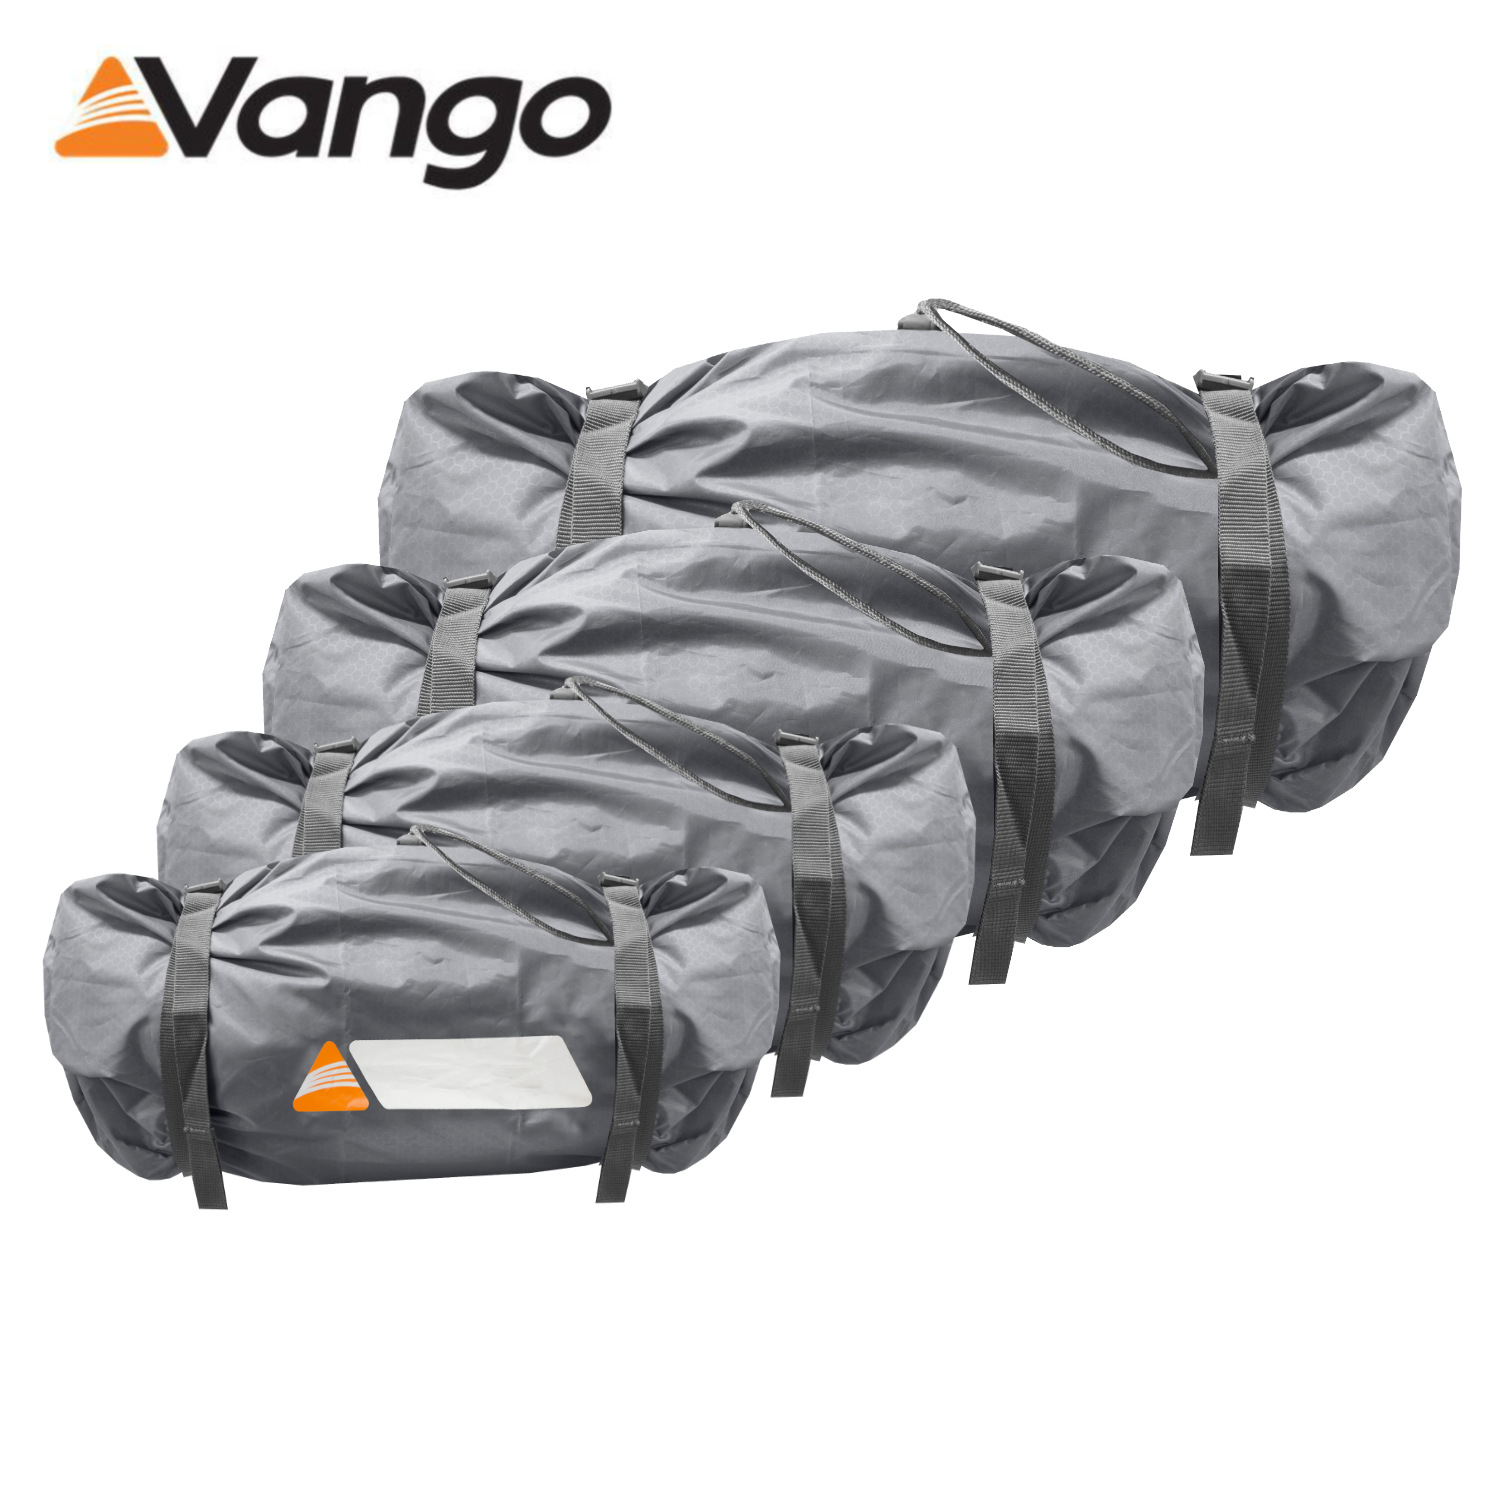 AWNING  TENT CANVAS STORAGE BAG  OLPRO